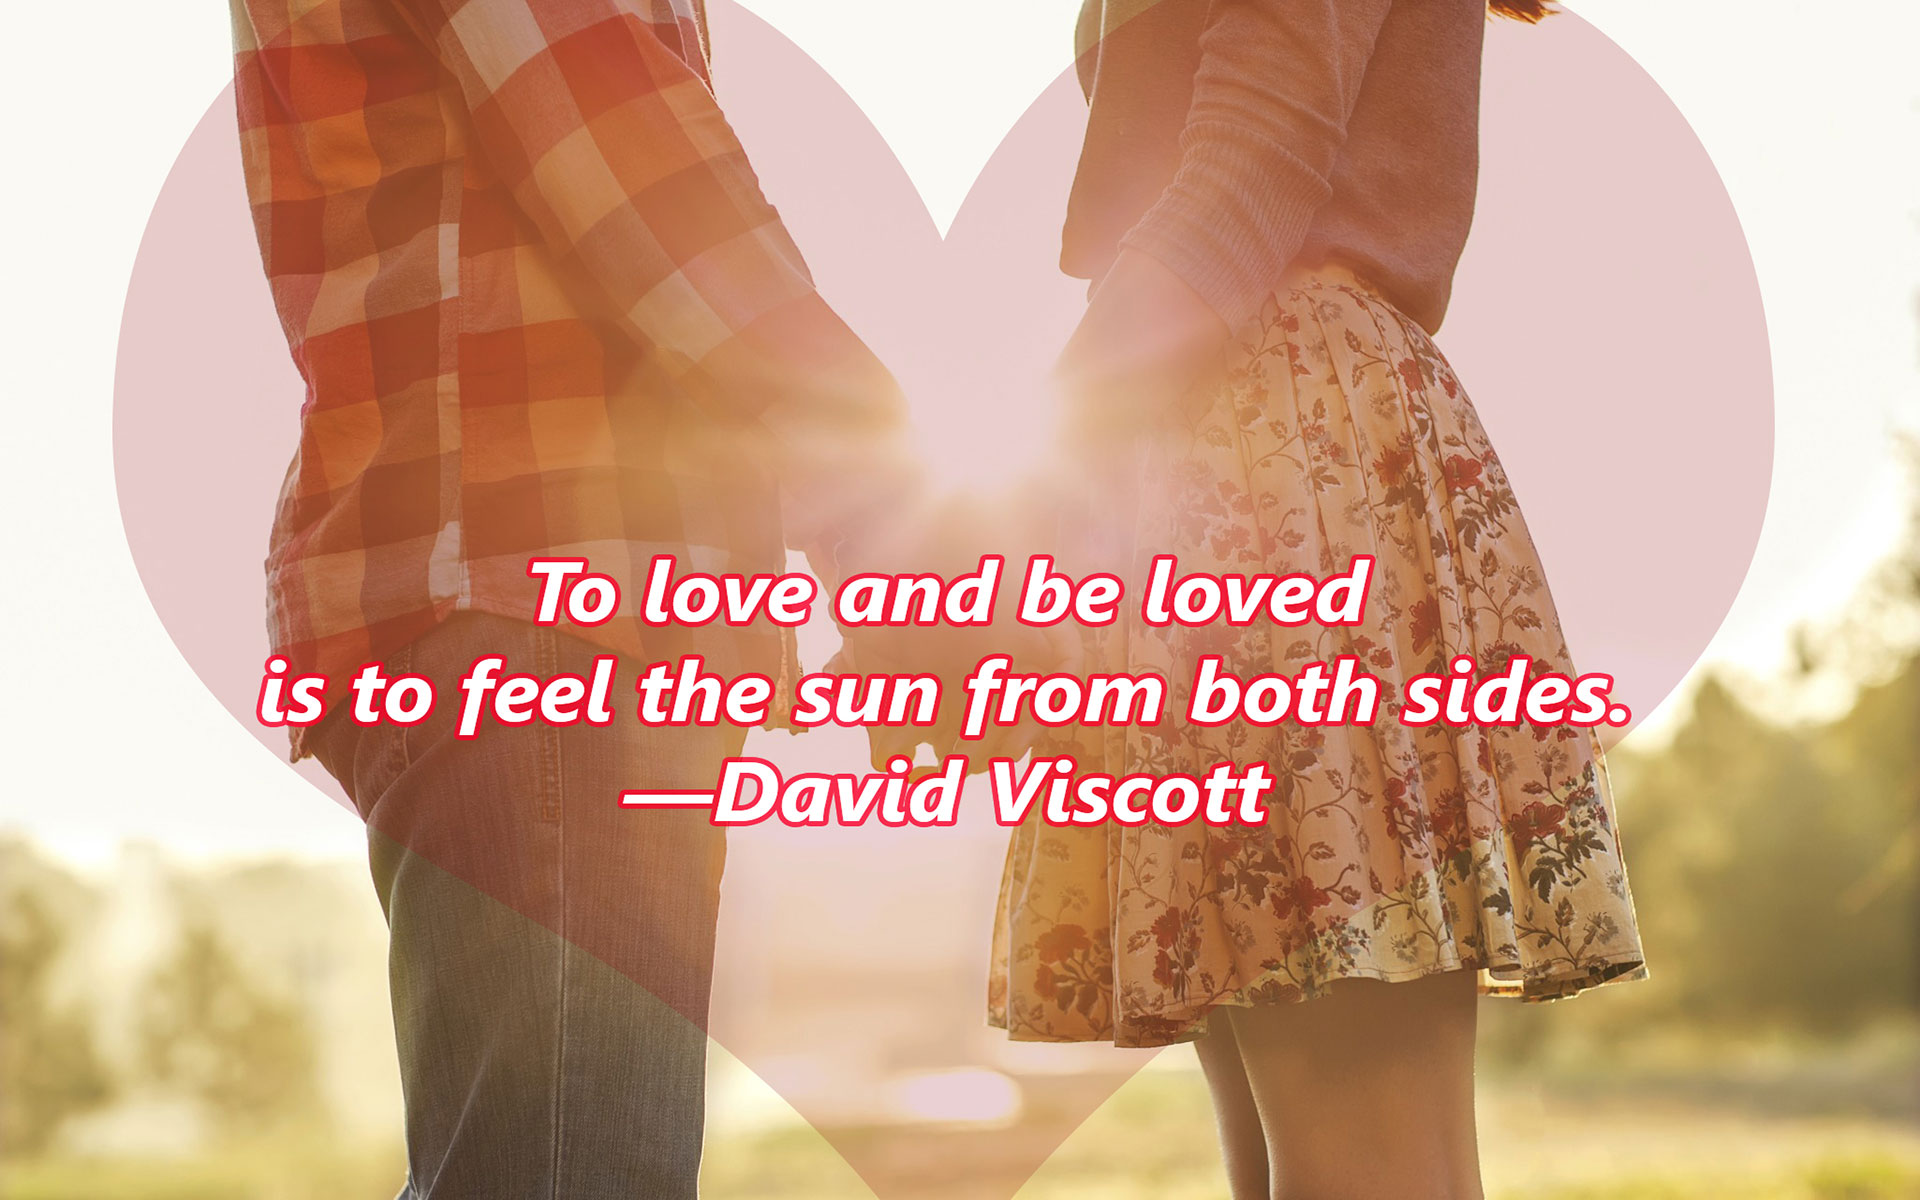 Cute Couple Wallpapers With Quotes 1080p Cute, Photos, - Person Falling In  Love - 1920x1200 Wallpaper 